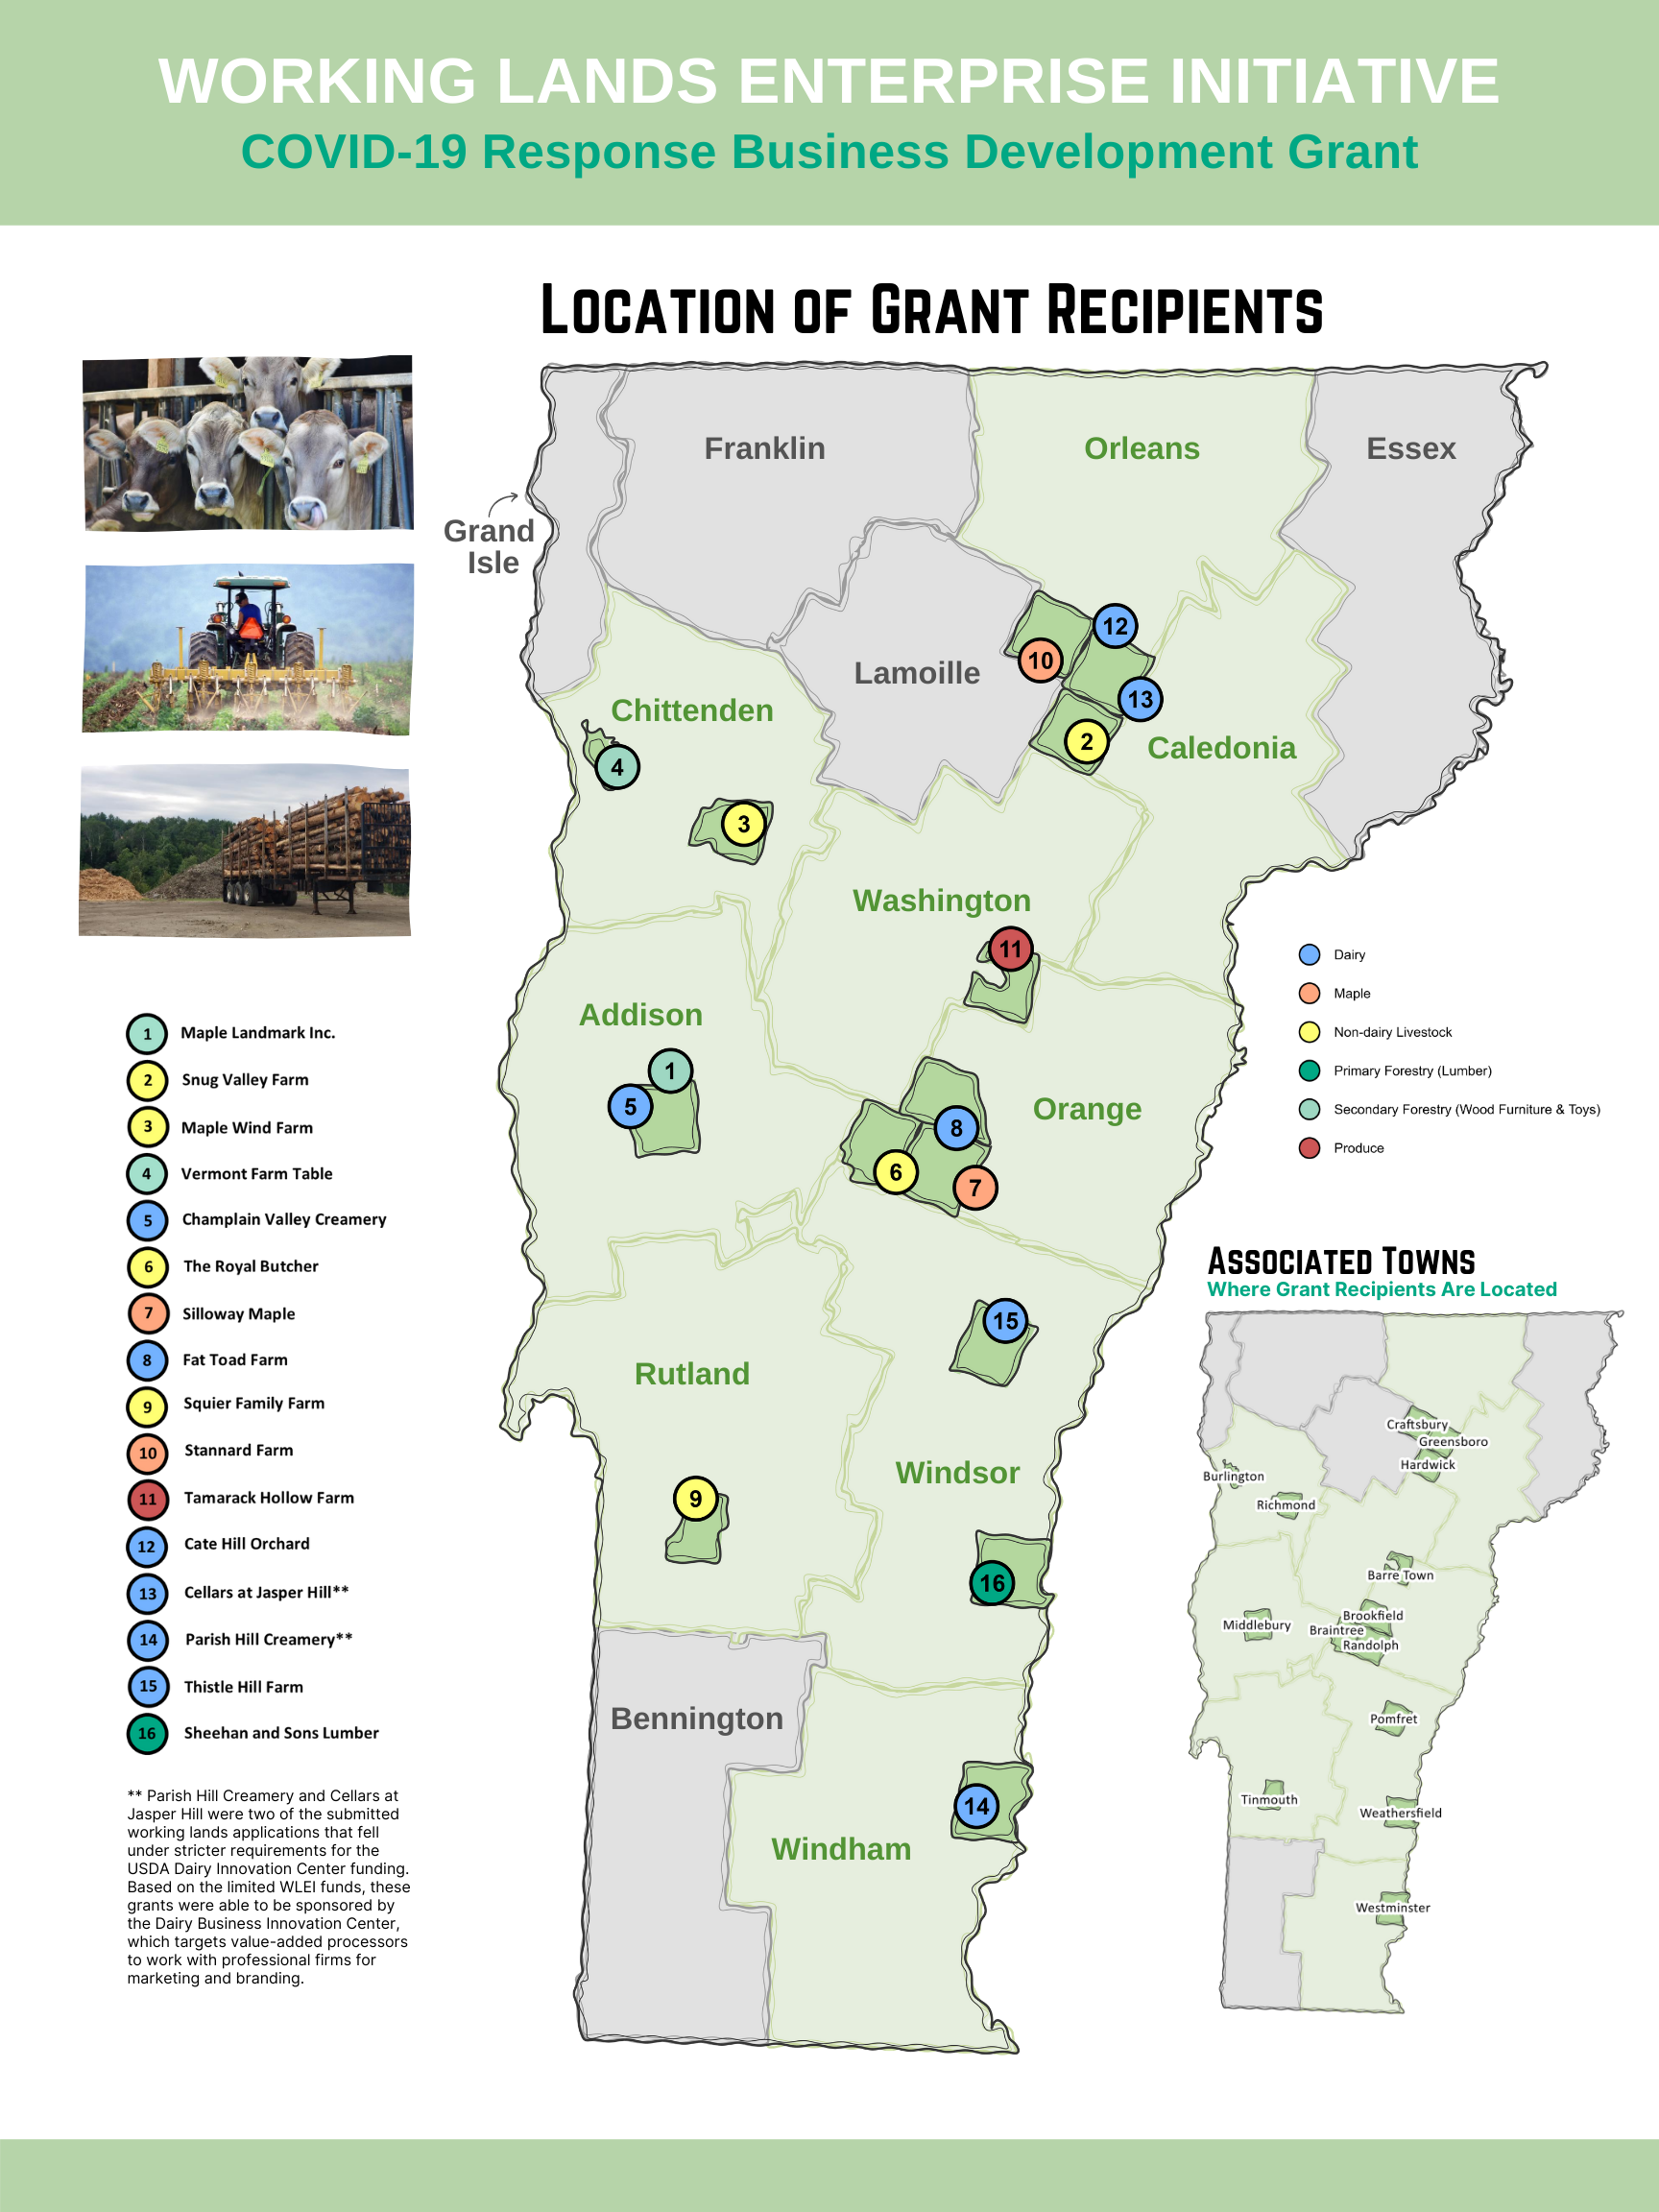 Flyer showing the site map of COVID-19 Response Business Grant recipients